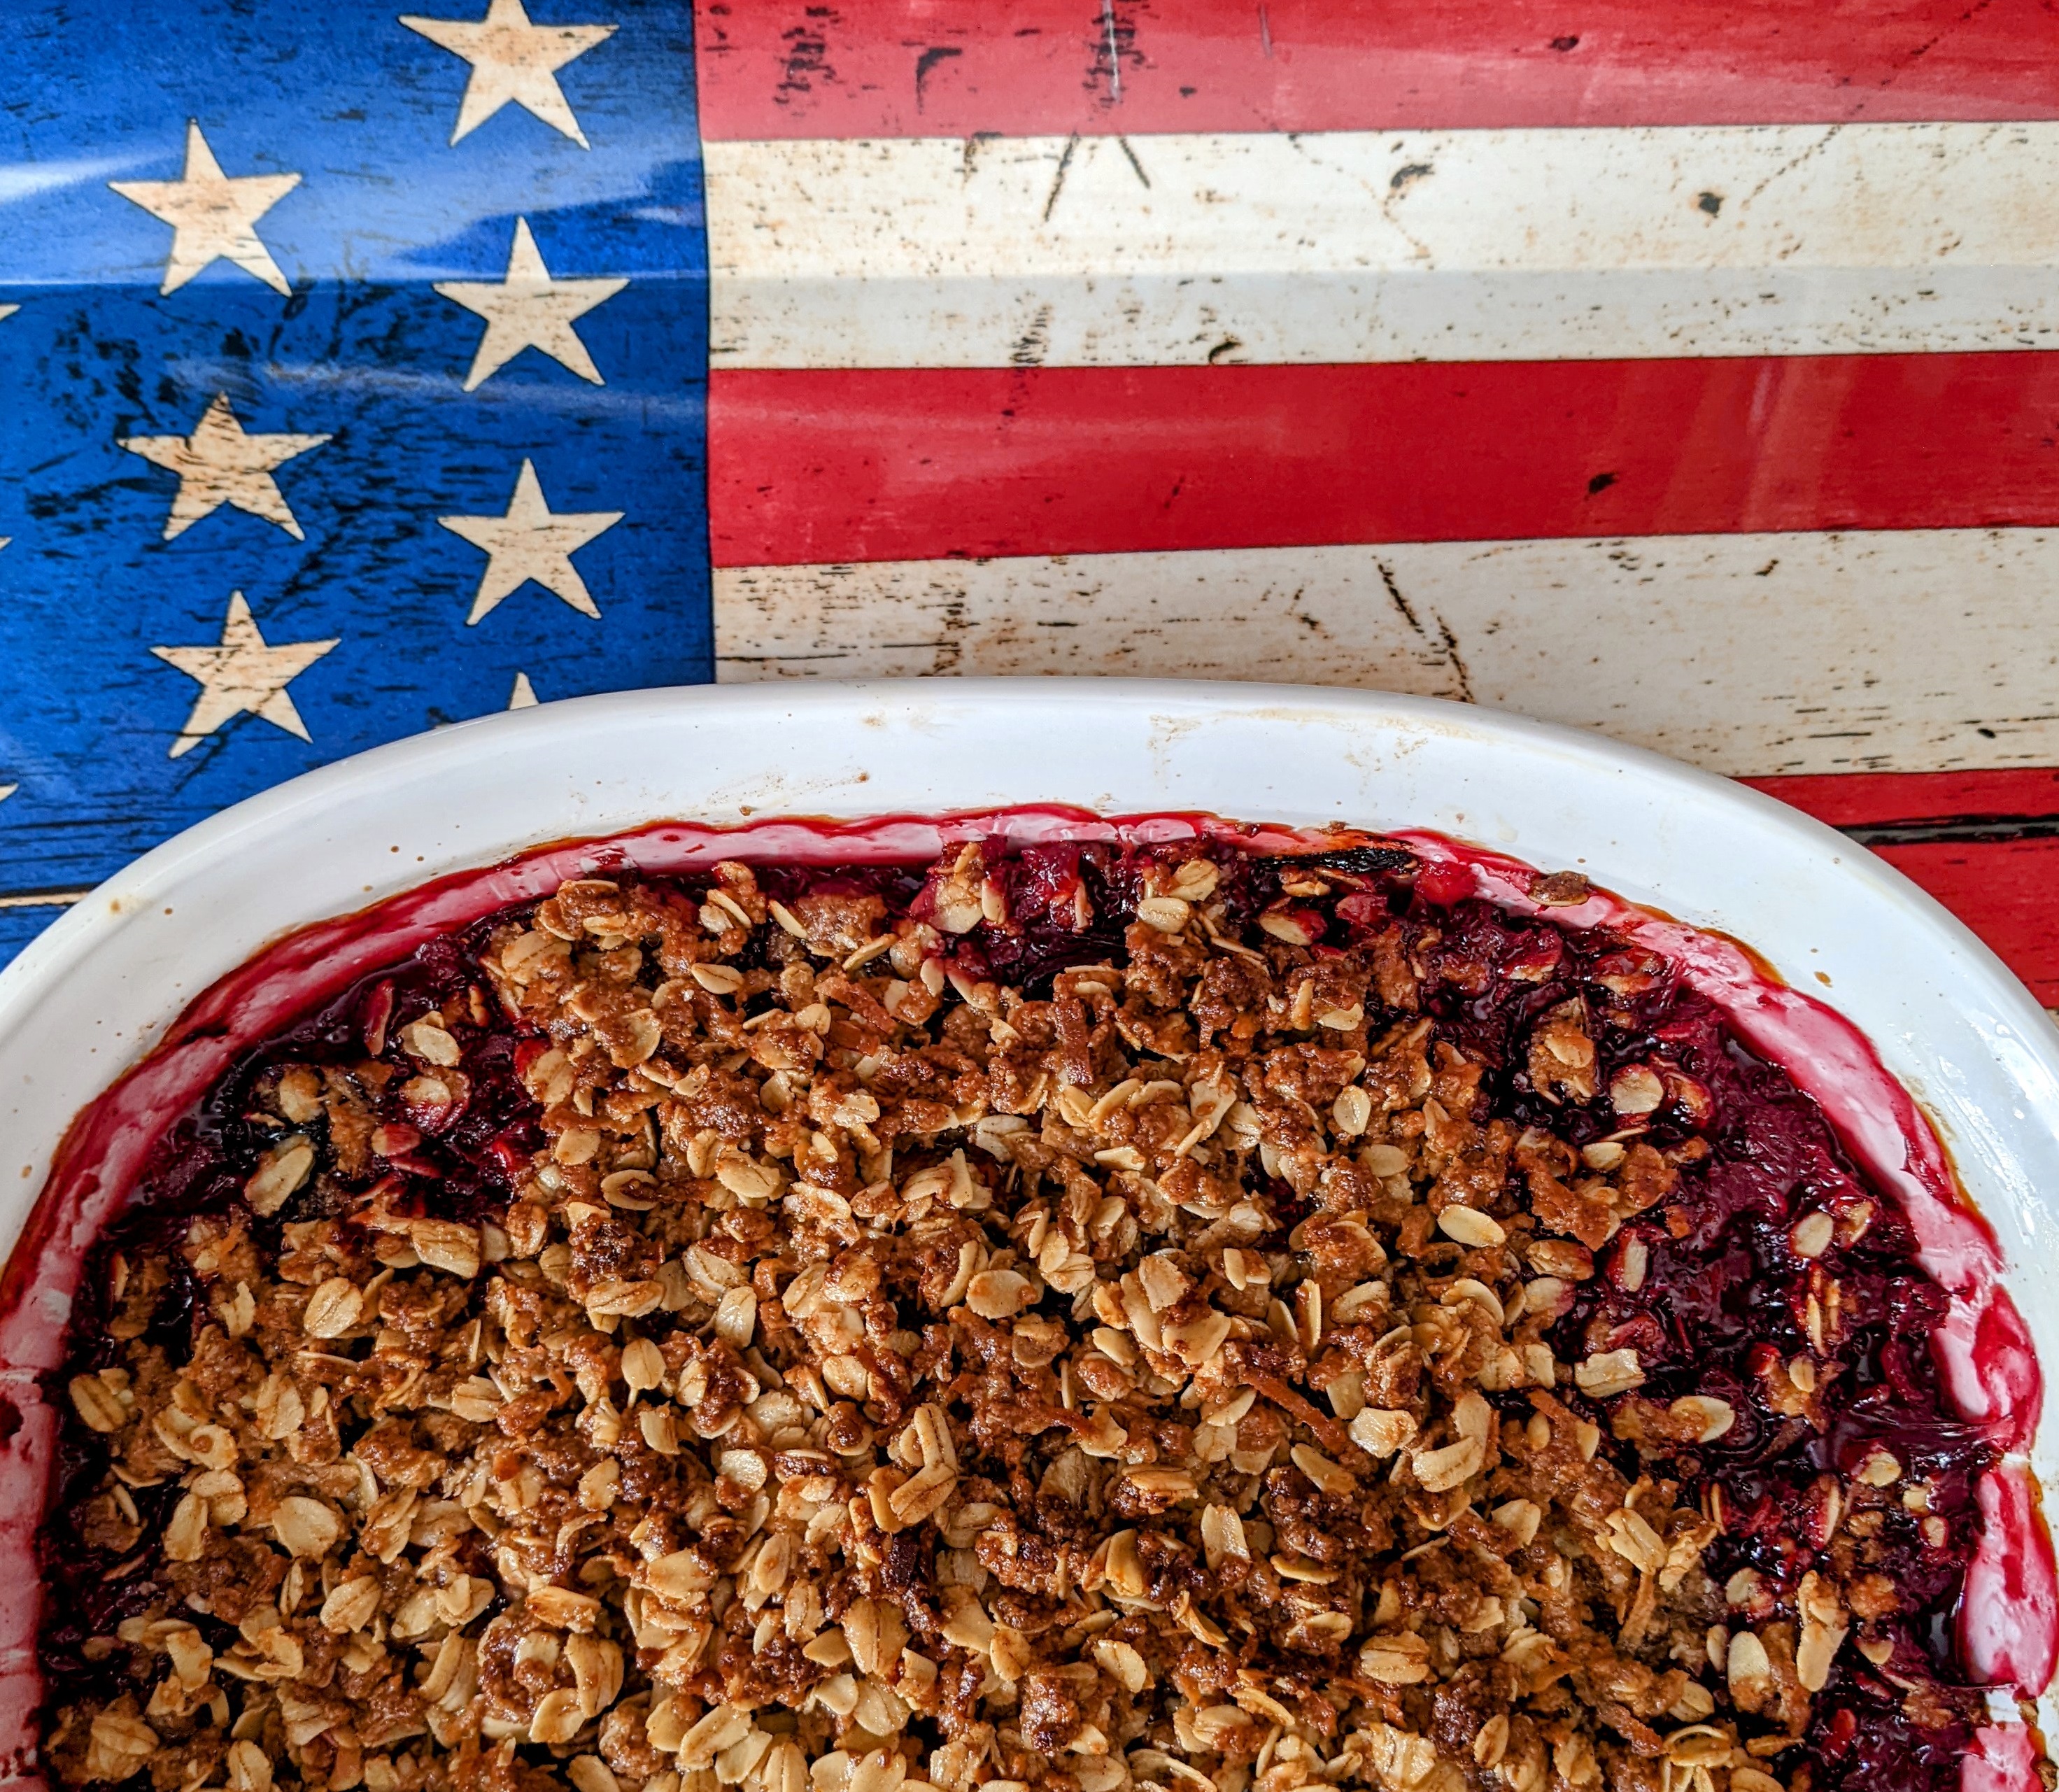 Fruit crisp dish in front of an American flag